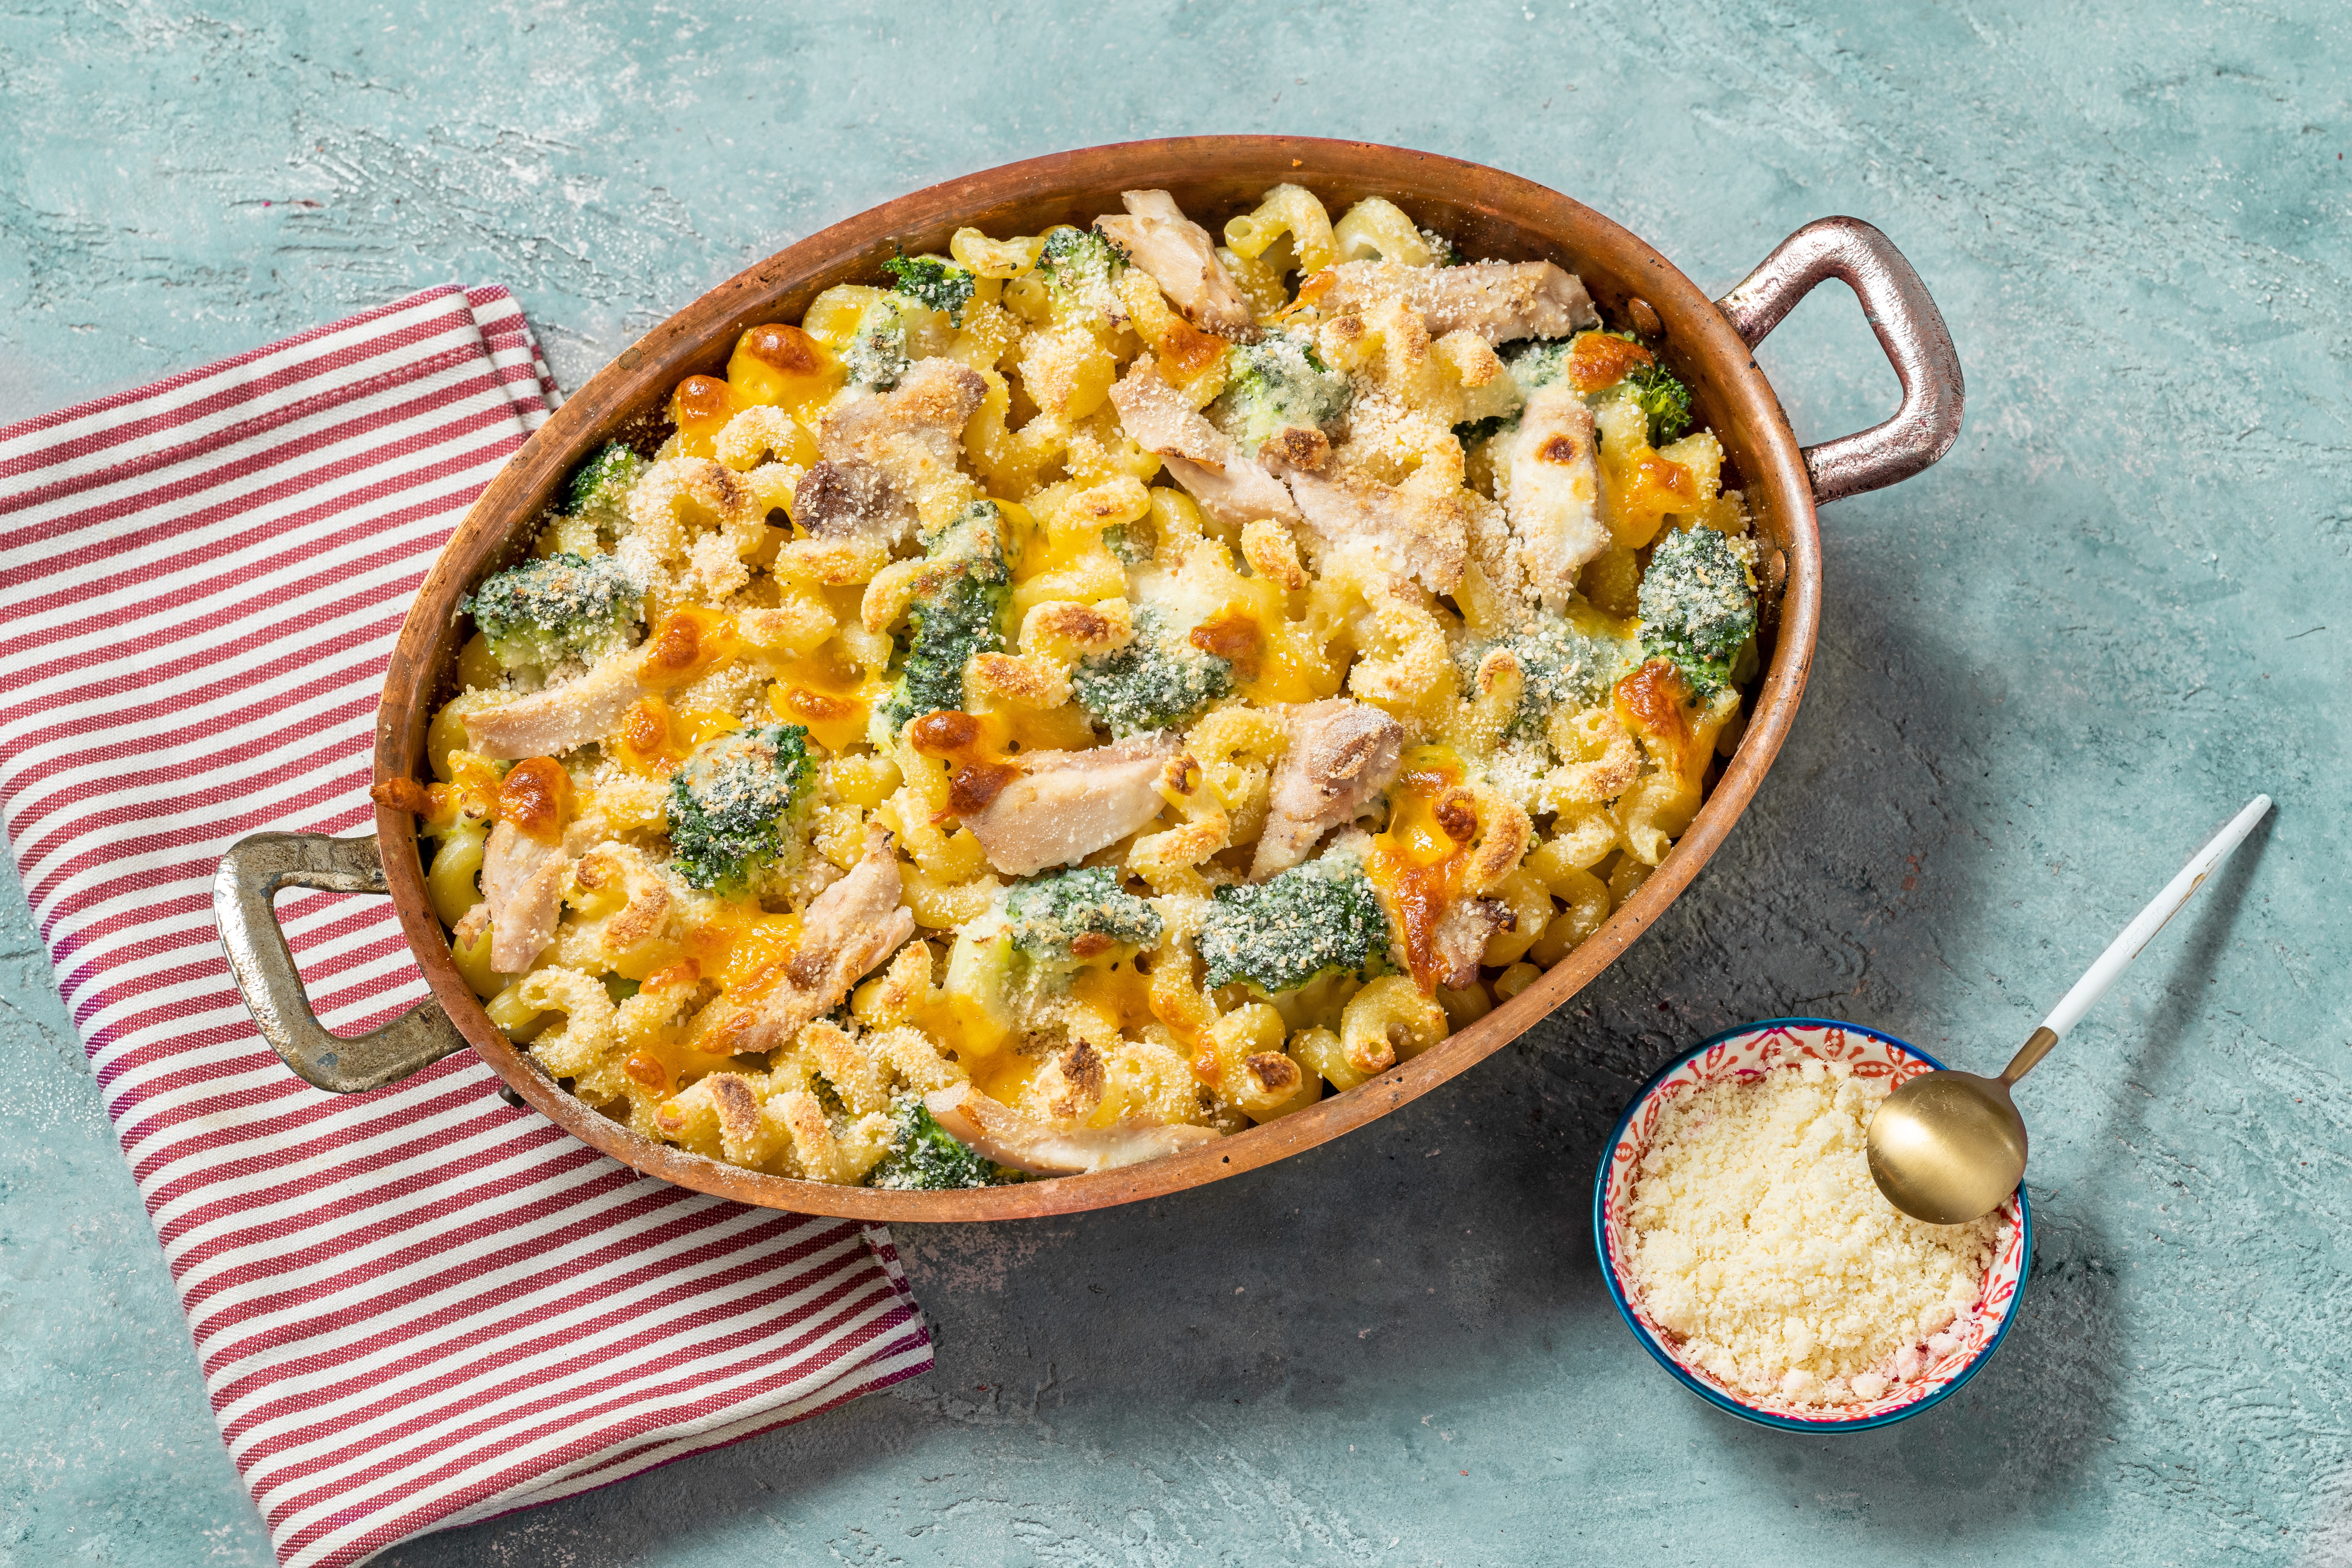 A baked chicken and broccoli pasta casserole in a dish, next to a spoonful of grated cheese